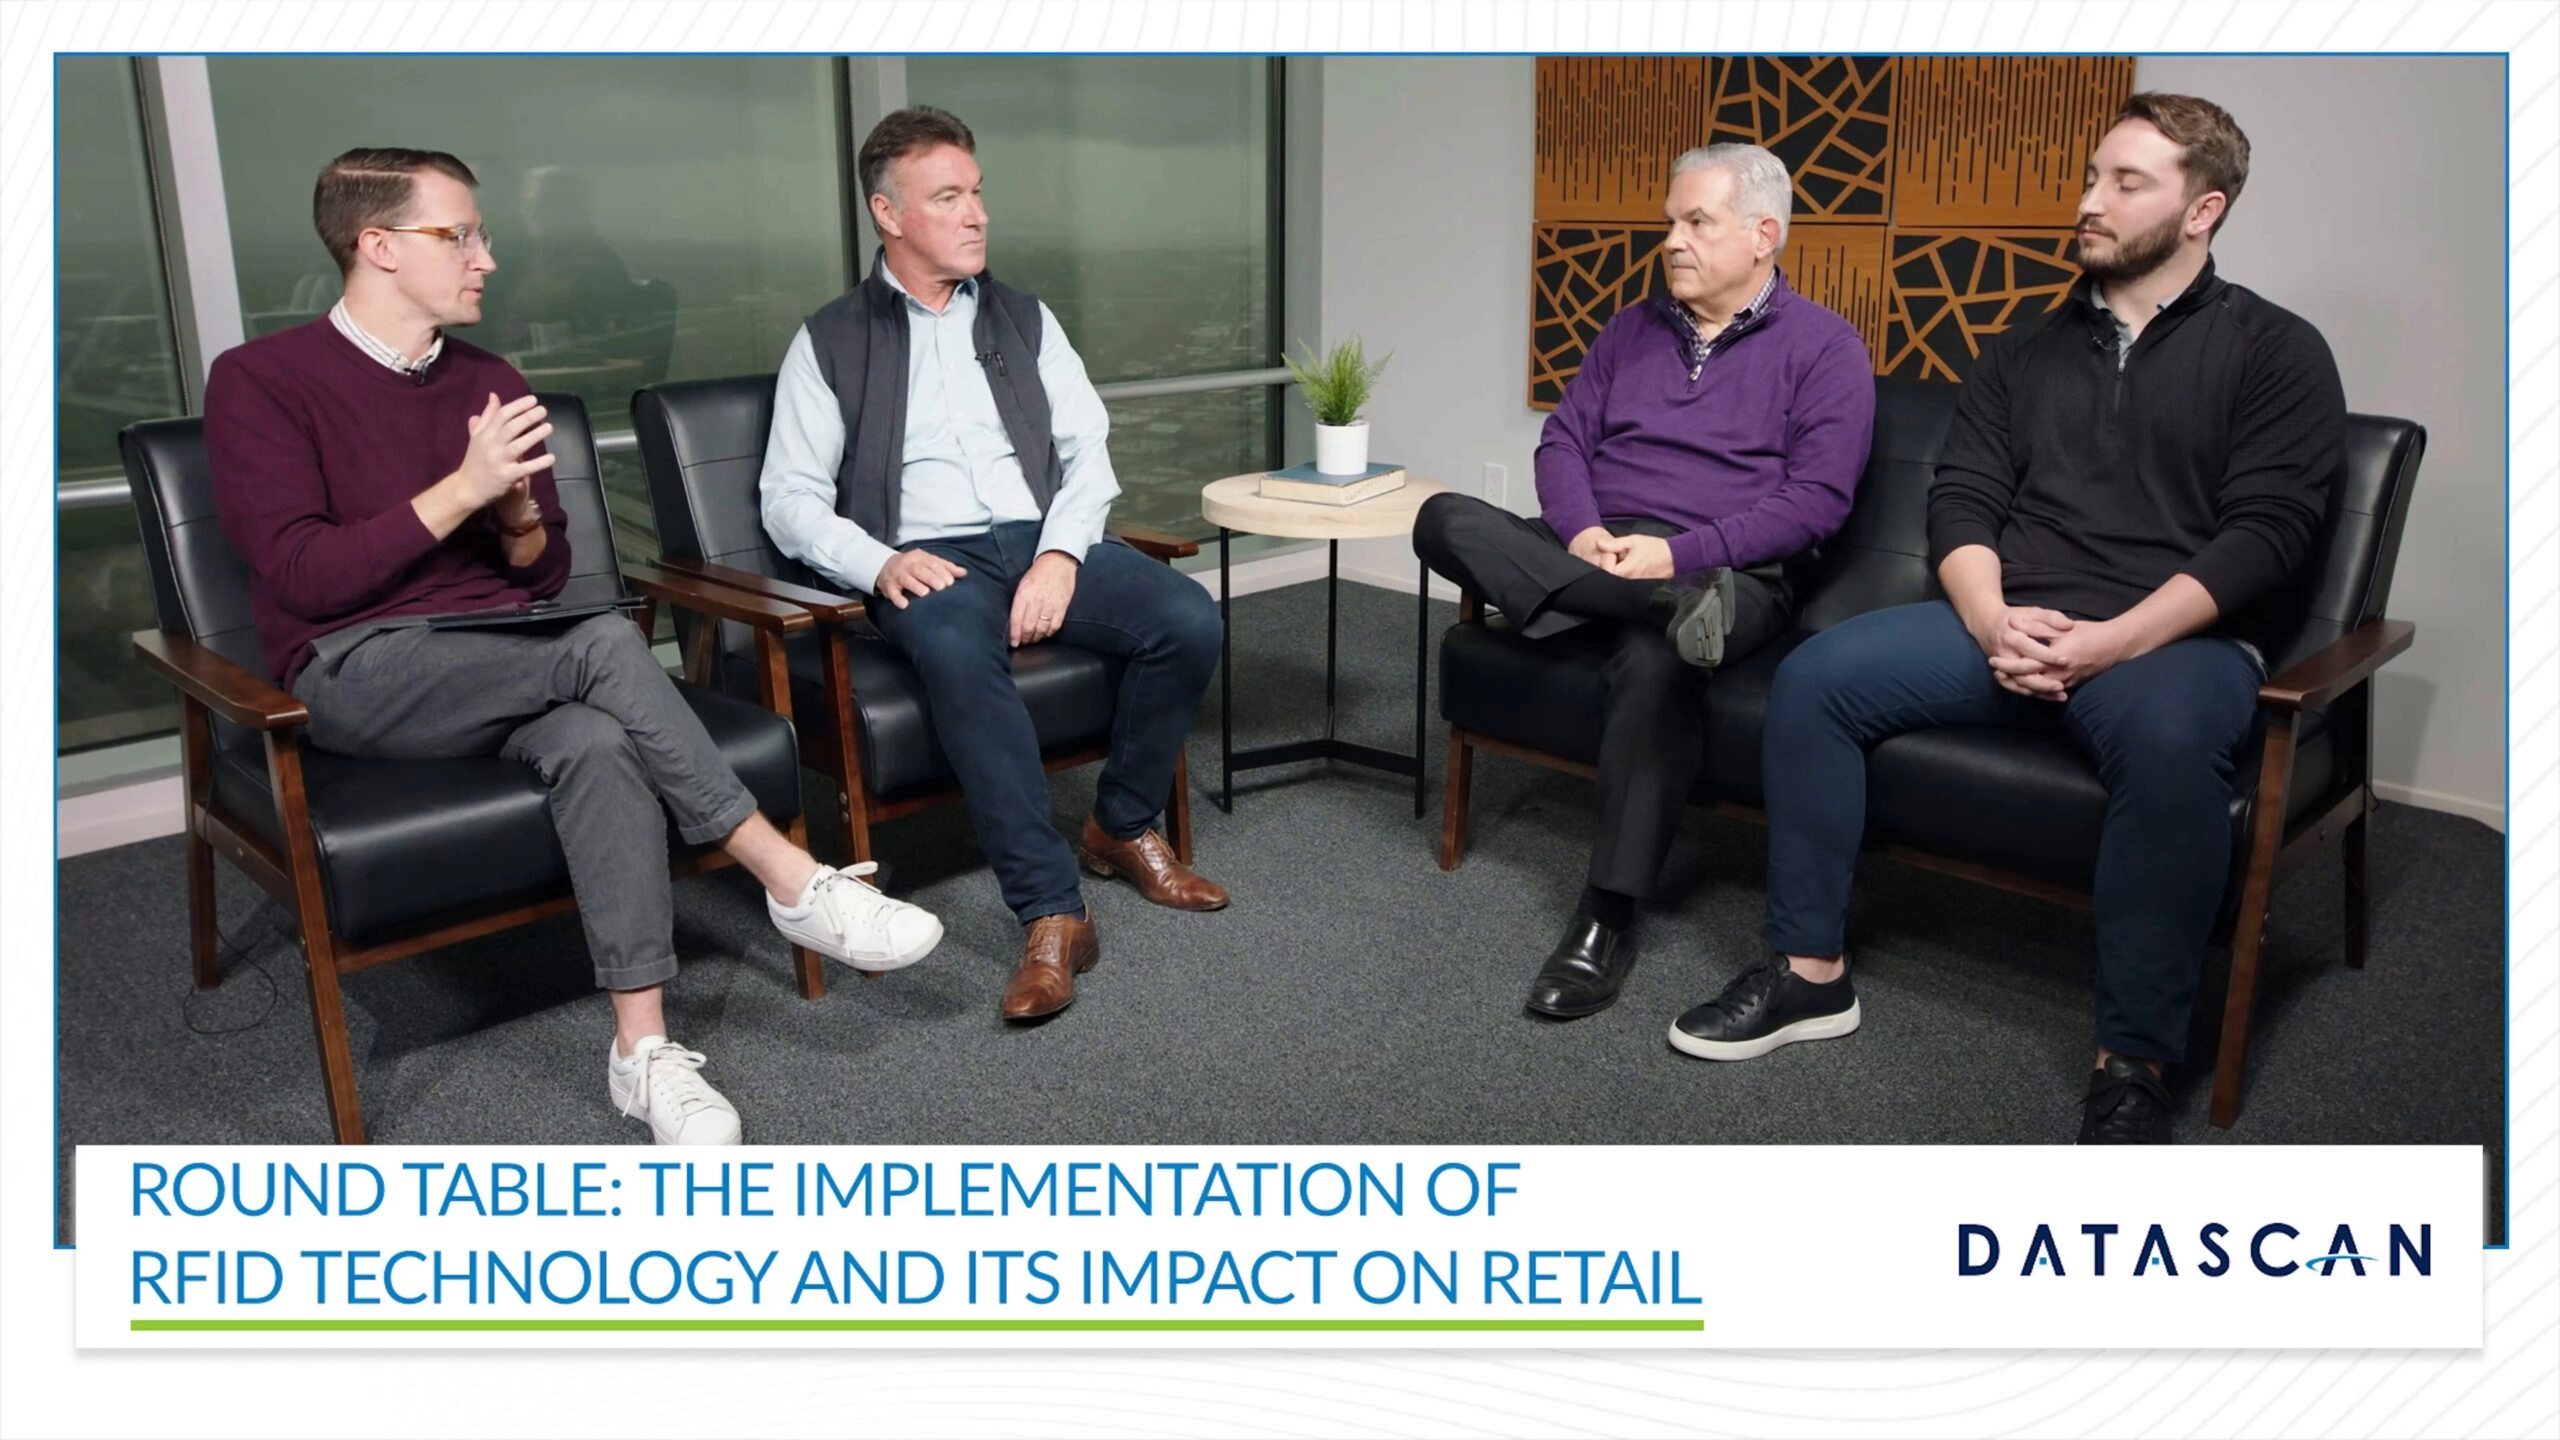 Roundtable: The Implementation of RFID Technology and Its Impact on Retail